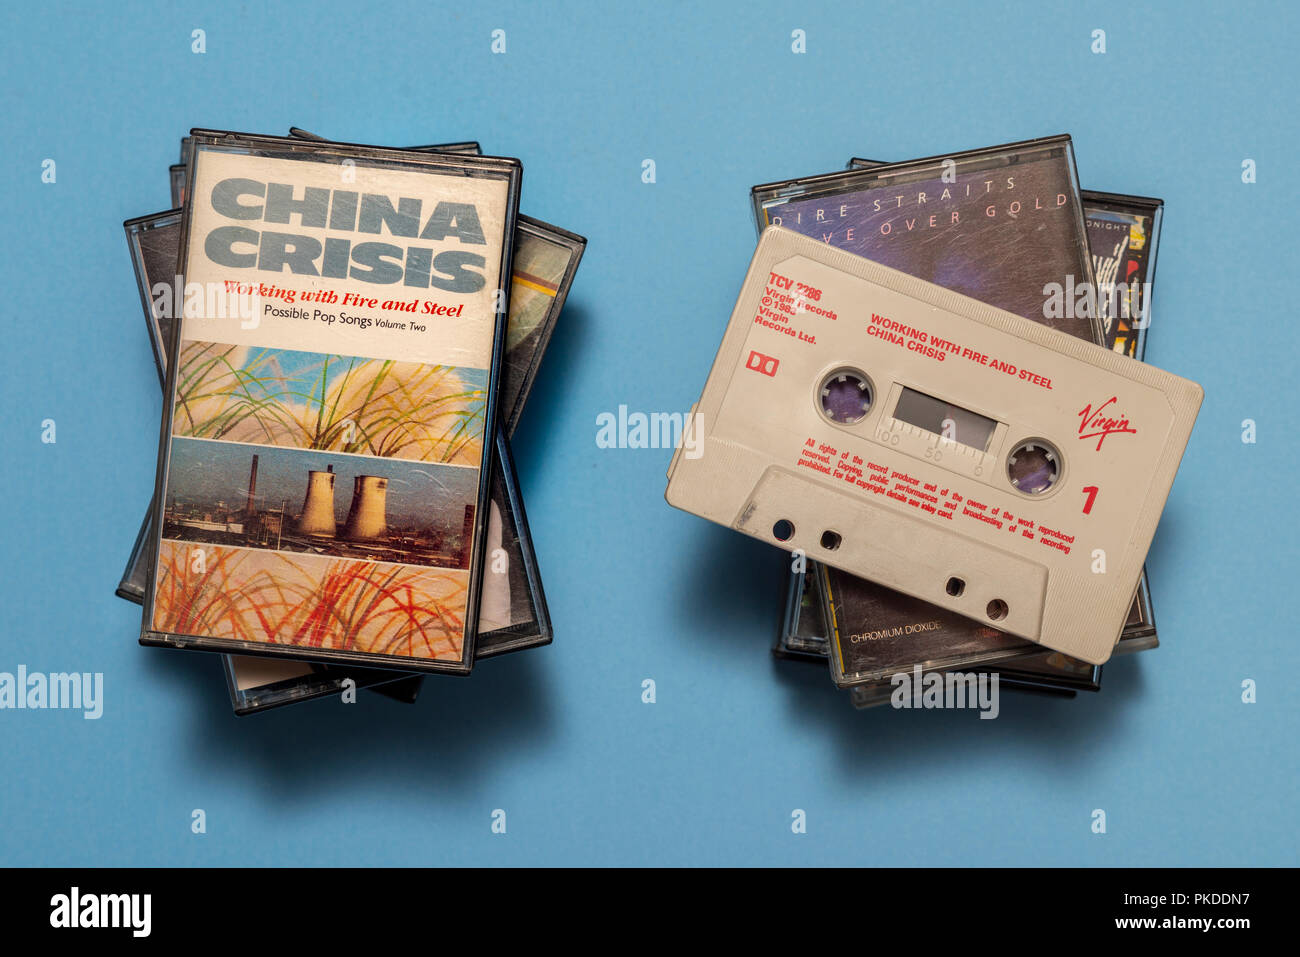 compact audio cassette of China Crisis, Working with Fire & Steel album with art work. Stock Photo